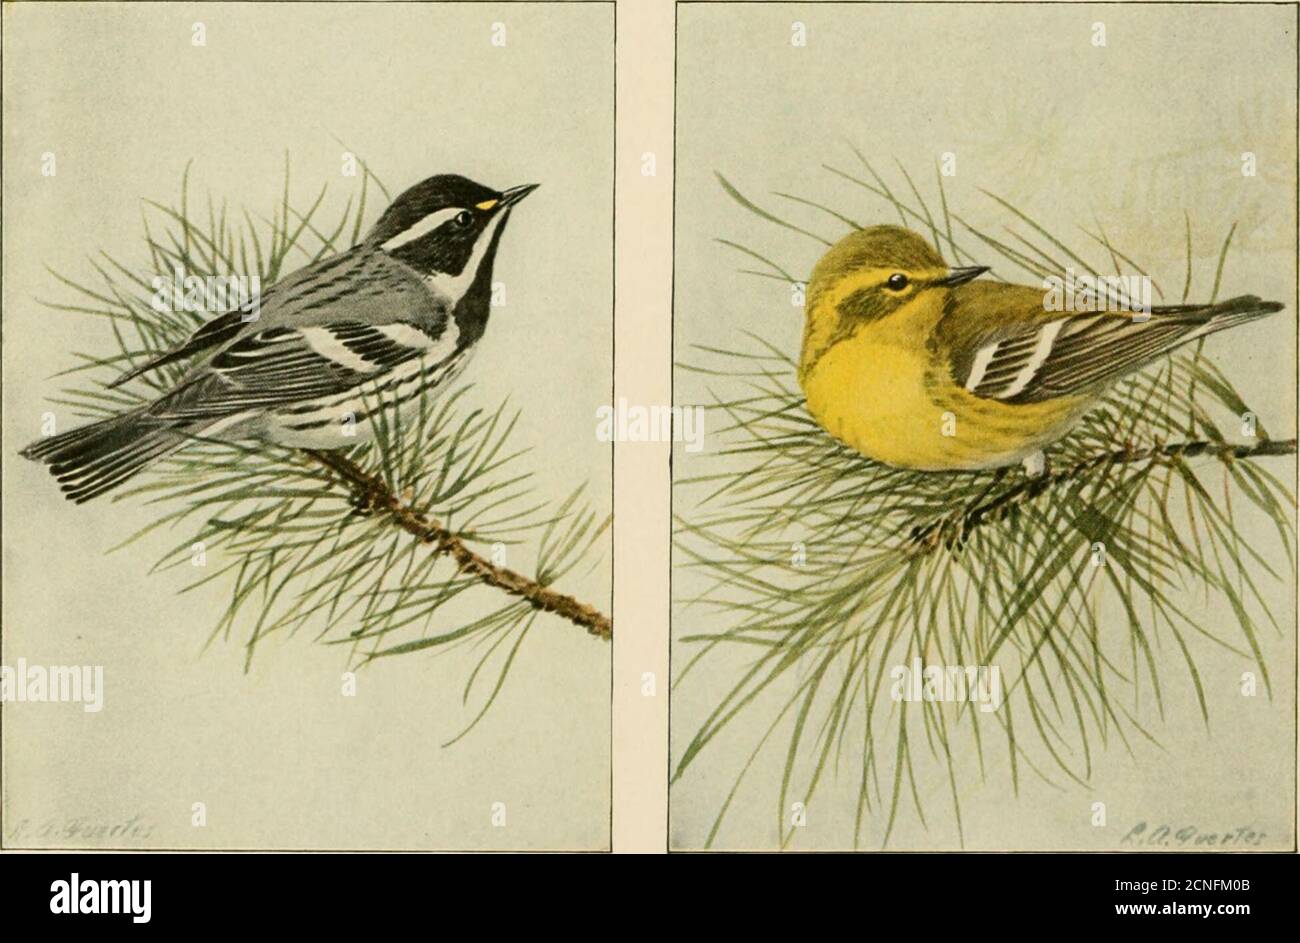 . The book of birds, common birds of town and country and American game birds . BAY-BREASTED WARBLERMale and Female BI.ACK-THROATED GREEN WARBLERMale and Female BLACK-THROATED GRAY WARBLER PINE WARBLER 92 Stock Photo